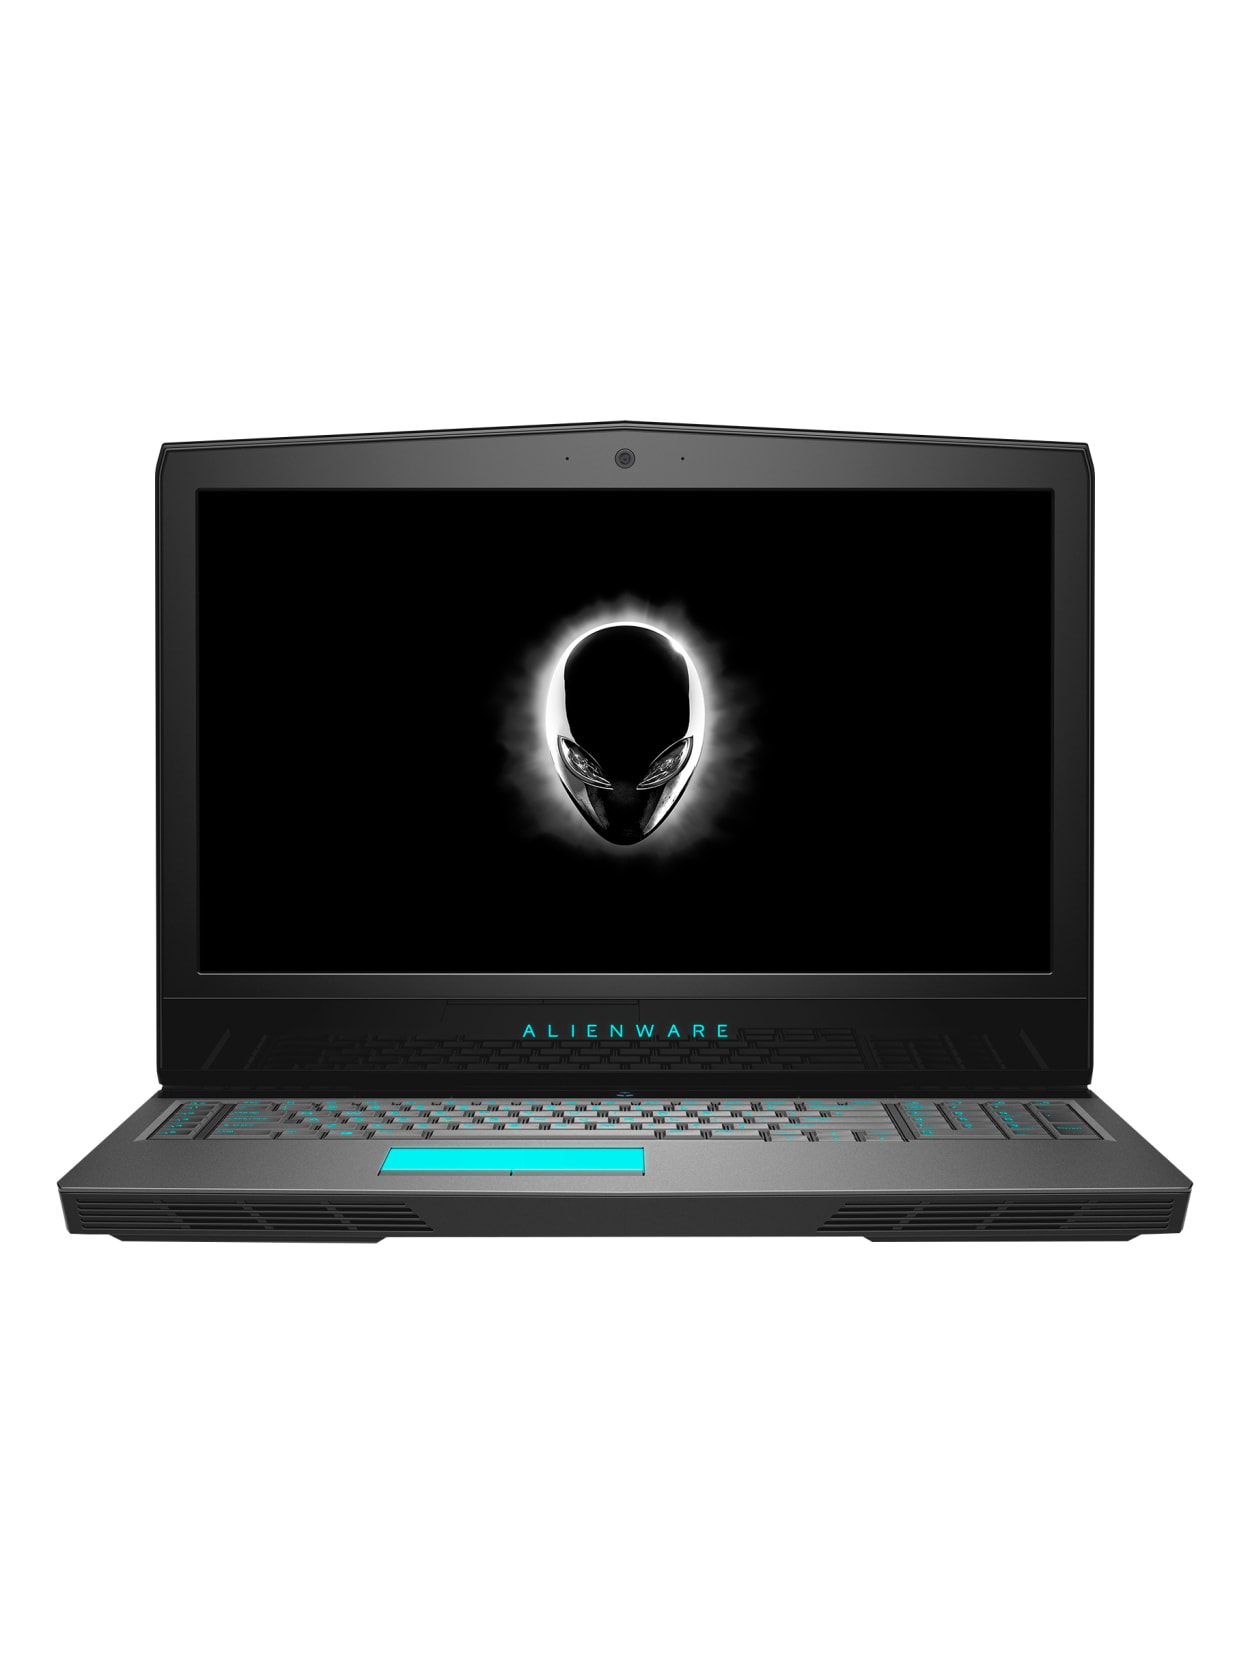 Alienware 17 R5 Laptop 17 3 Screen 8th Gen Intel Core I7 8gb Memory 1tb Hard Drive256gb Solid State Drive Windows 10 Home Aw17r5 7108slv Pus Office Depot